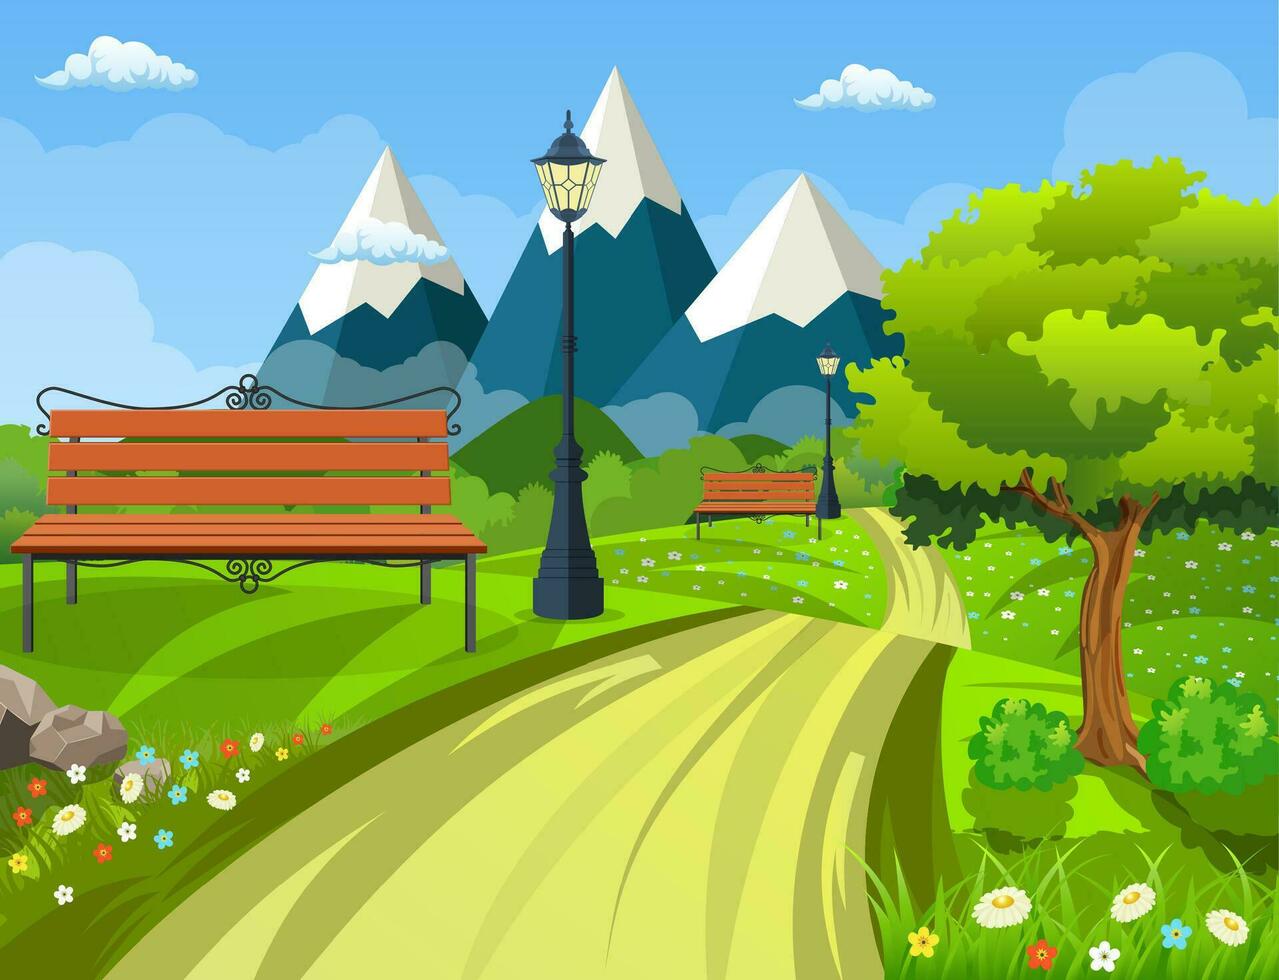 Summer, spring day park. Wooden bench, street lamp in park trail with lush green trees, bushes and mountains in the background. Vector illustration in flat style